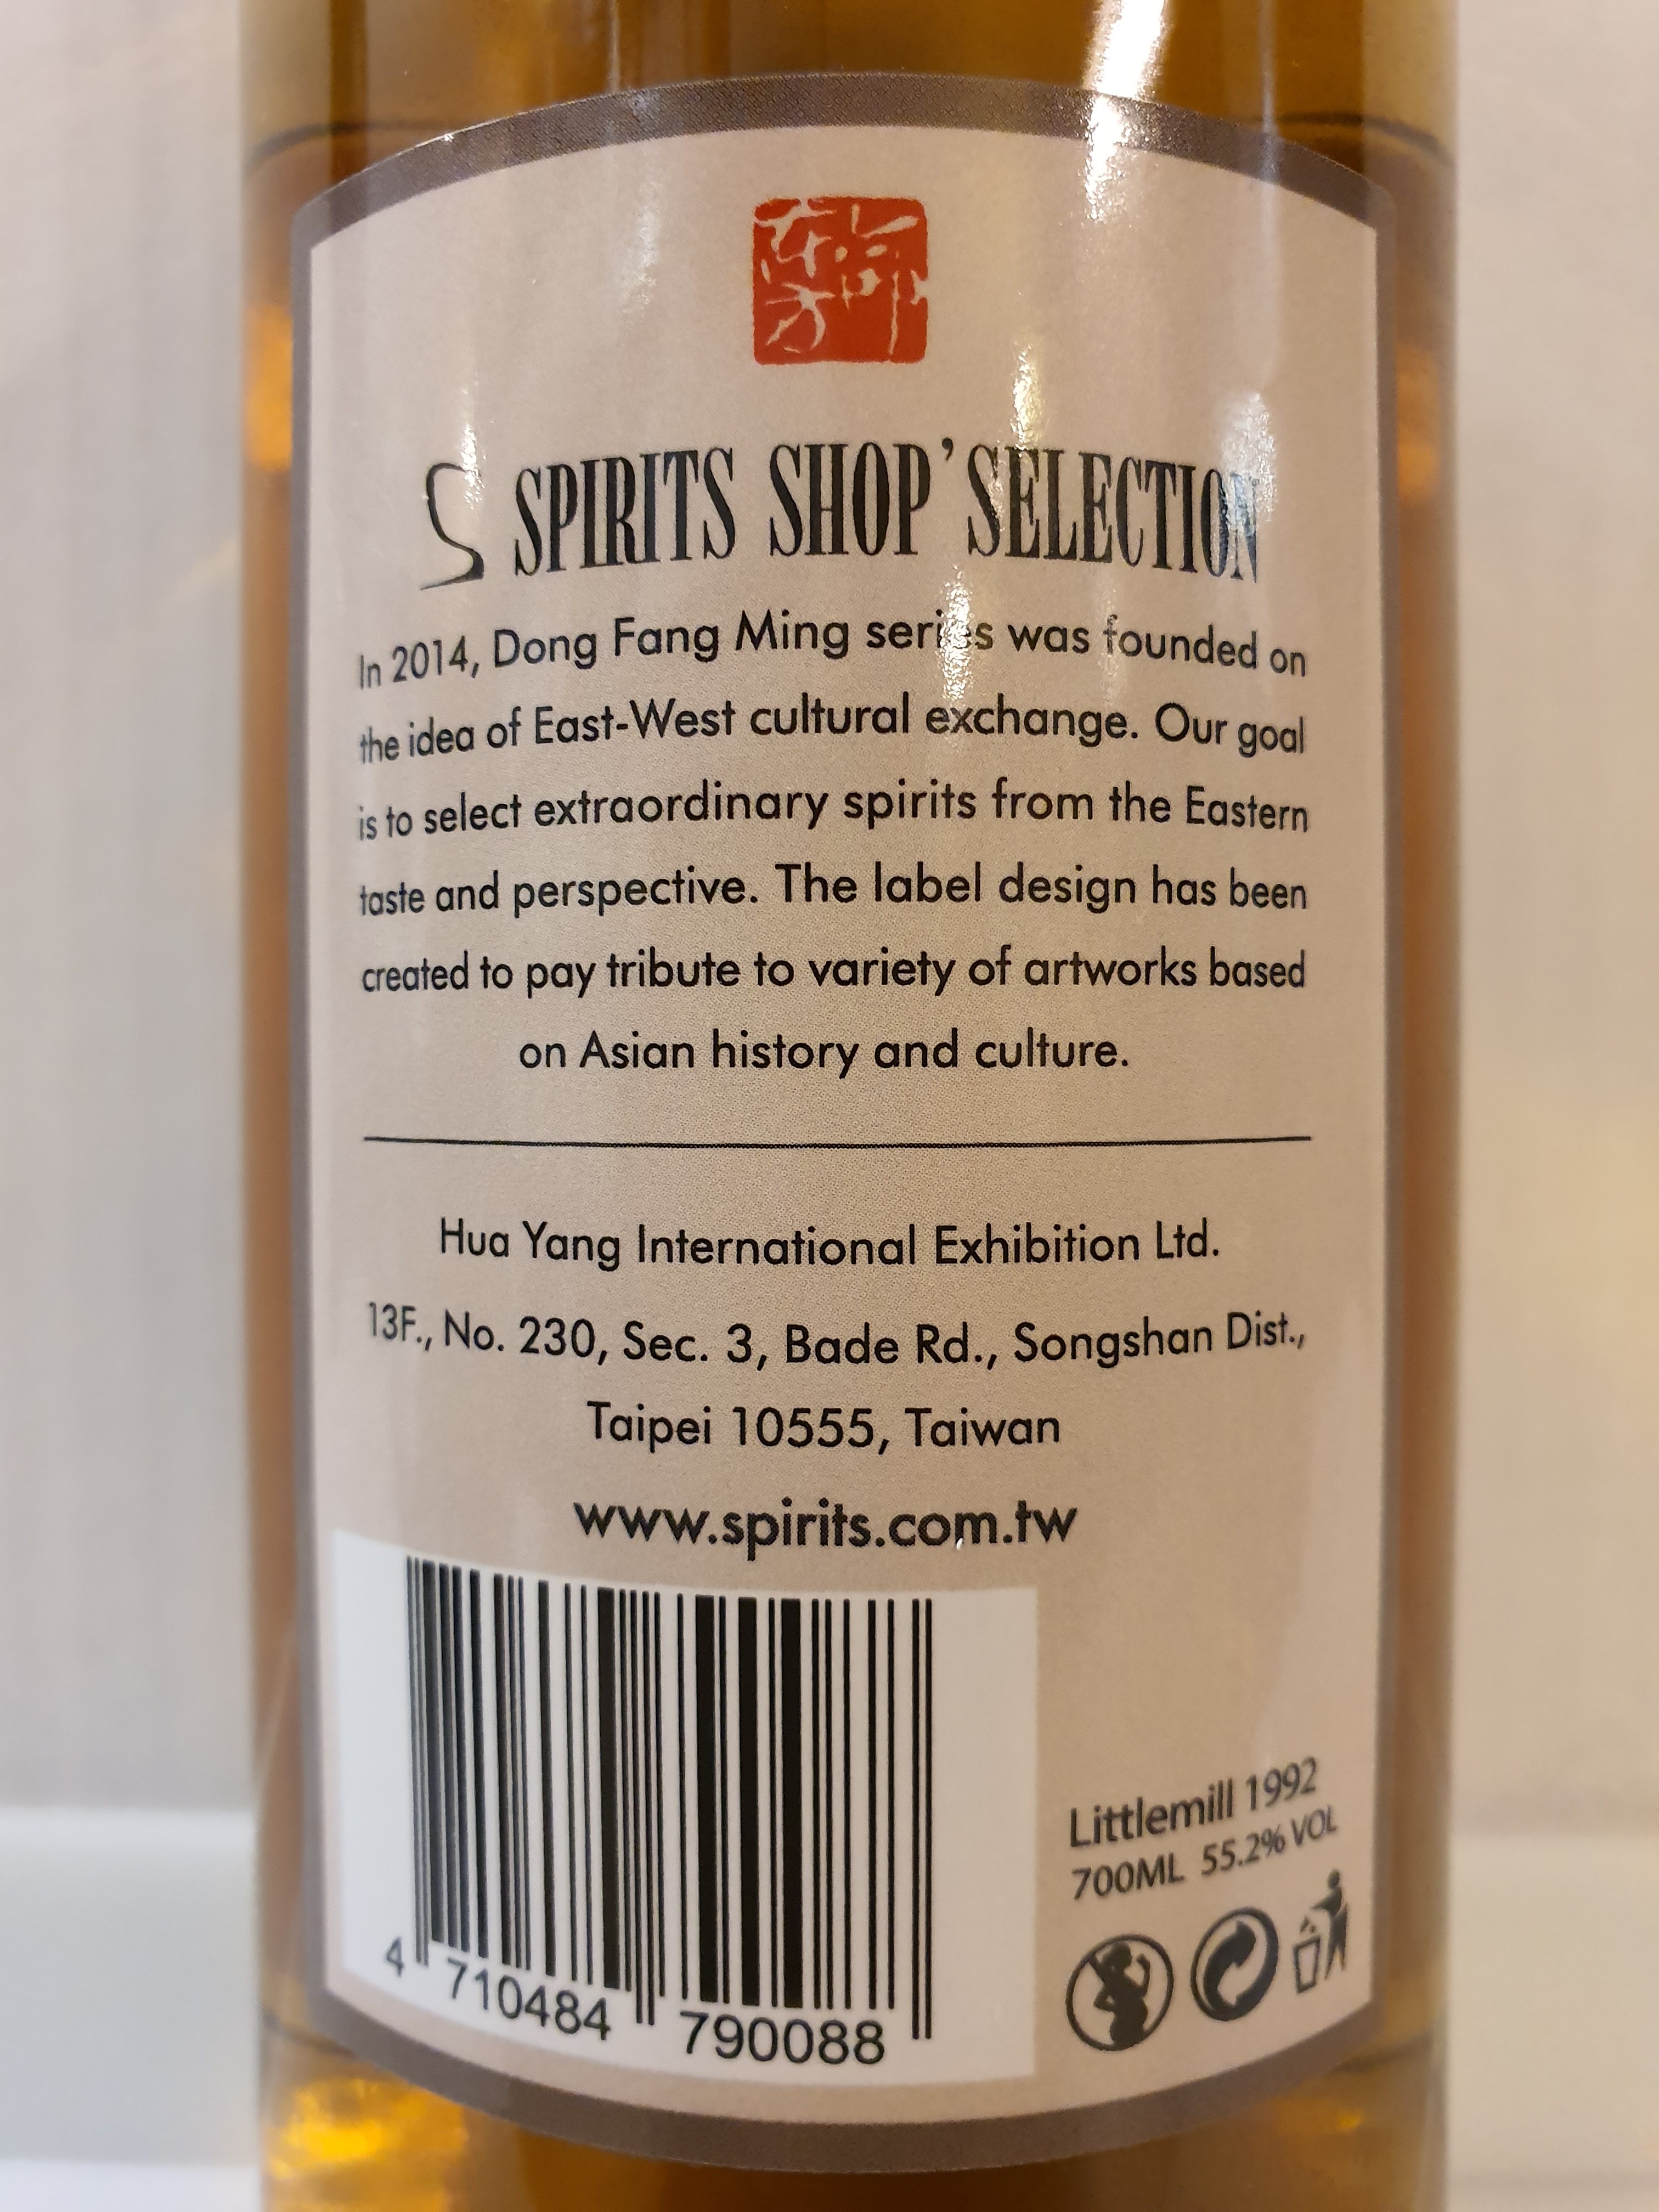 Littlemill 25y - S-Spirits Shop Selection